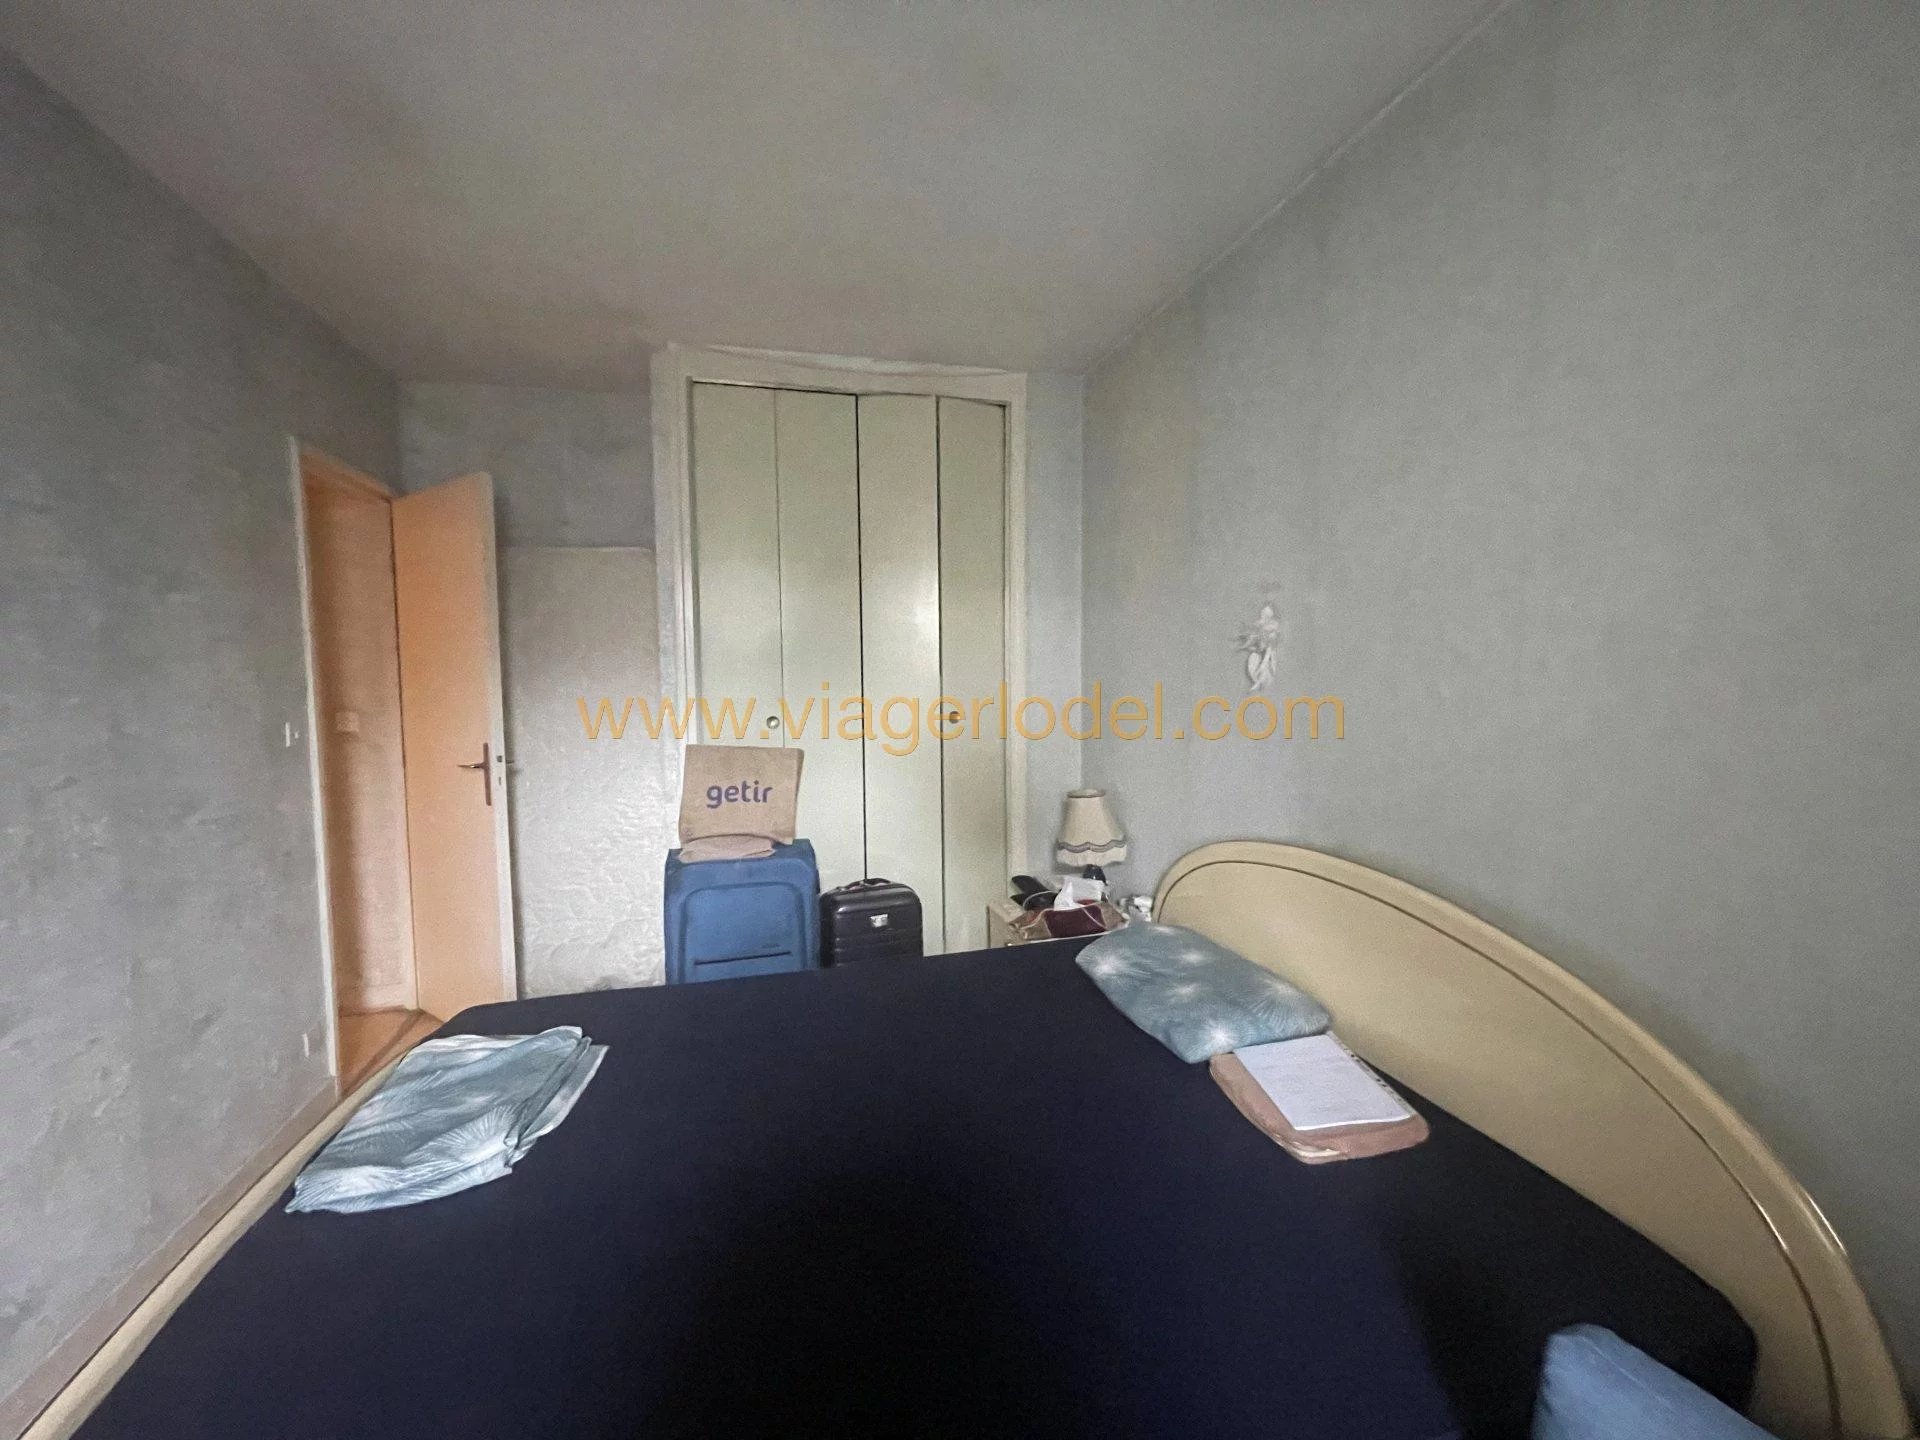 Ref. 9153 - LIFE ANNUITY - RENTED 4-room apartment